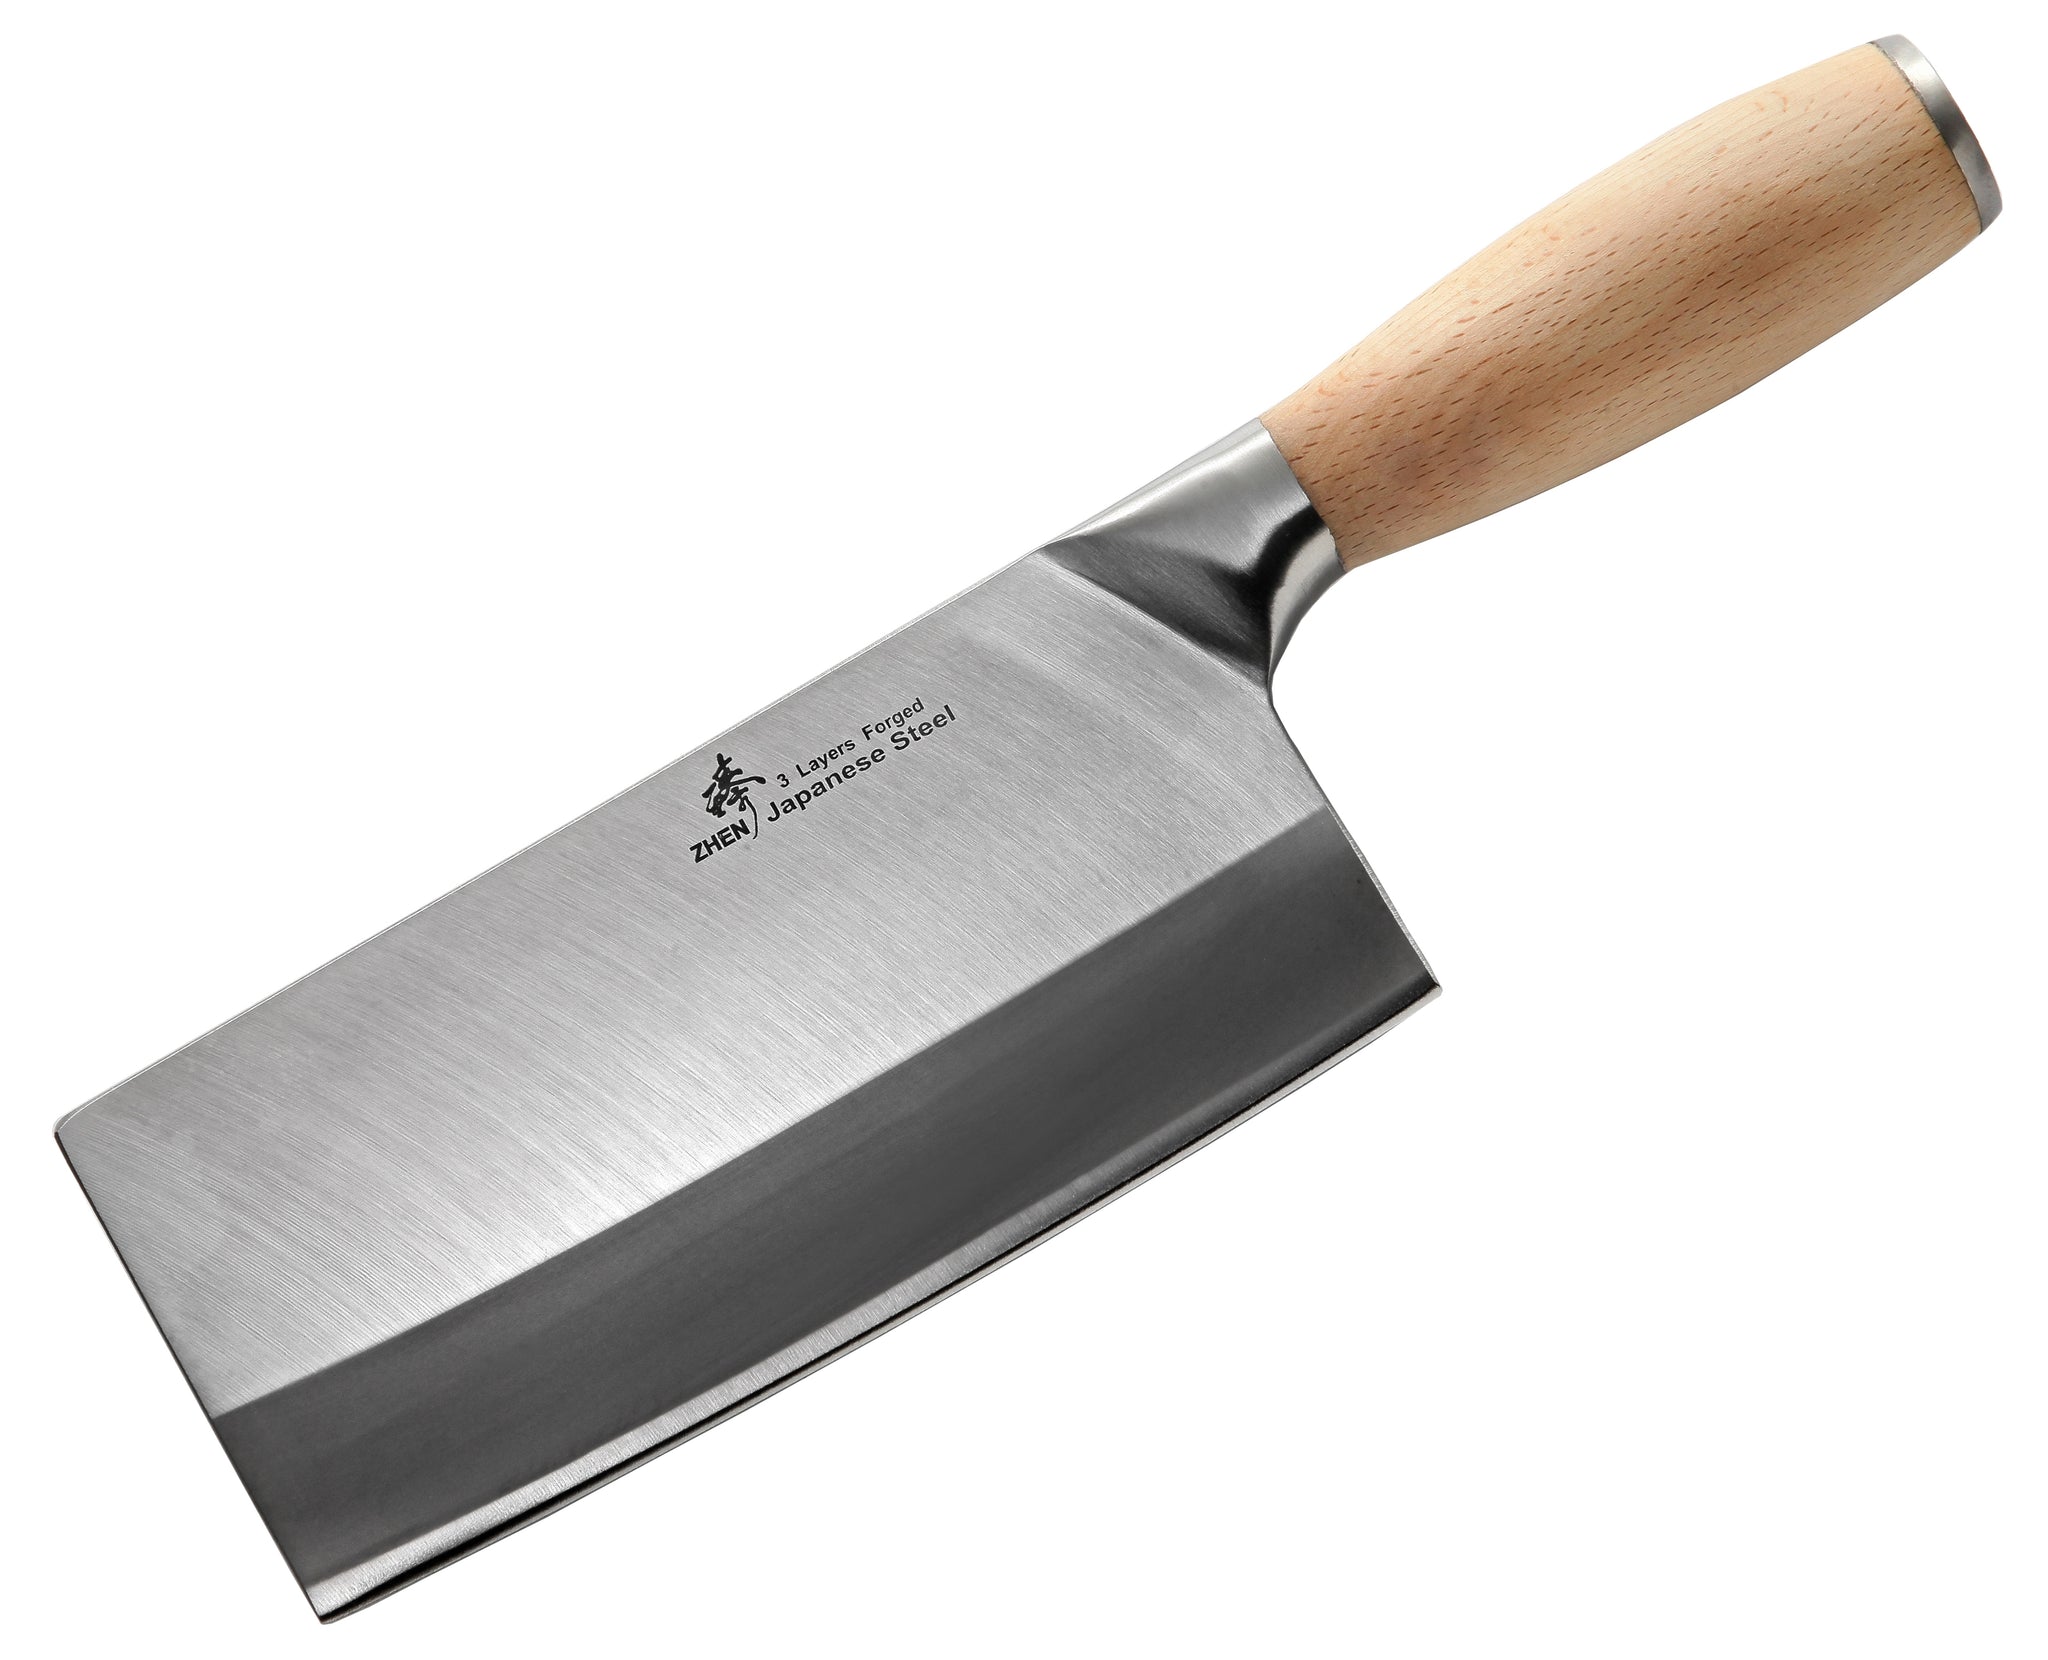 Cleaver & Chef Knife